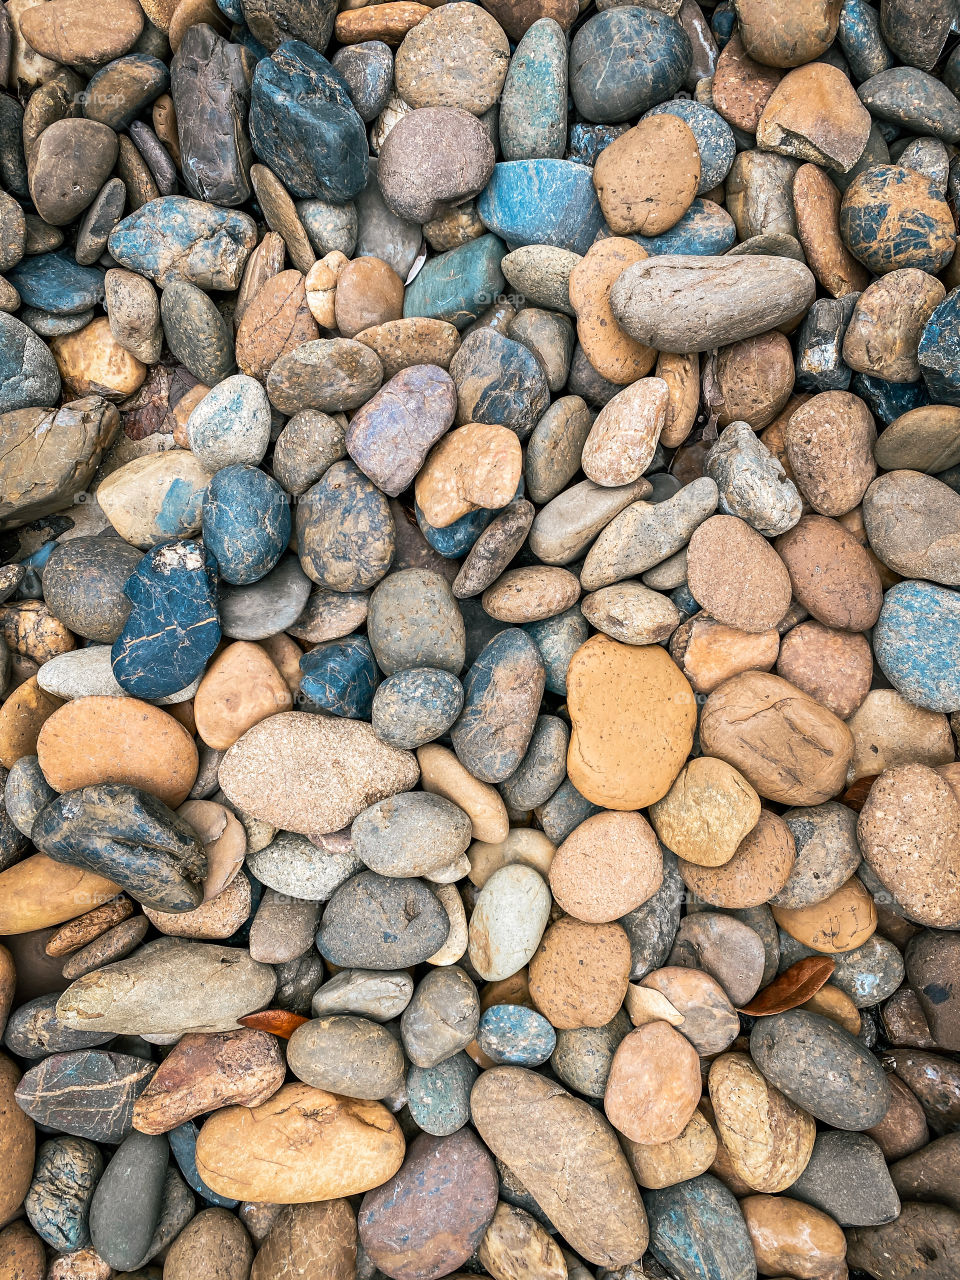 Texture pattern of pebbles gravel and small stones in walk way path for garden interior decoration